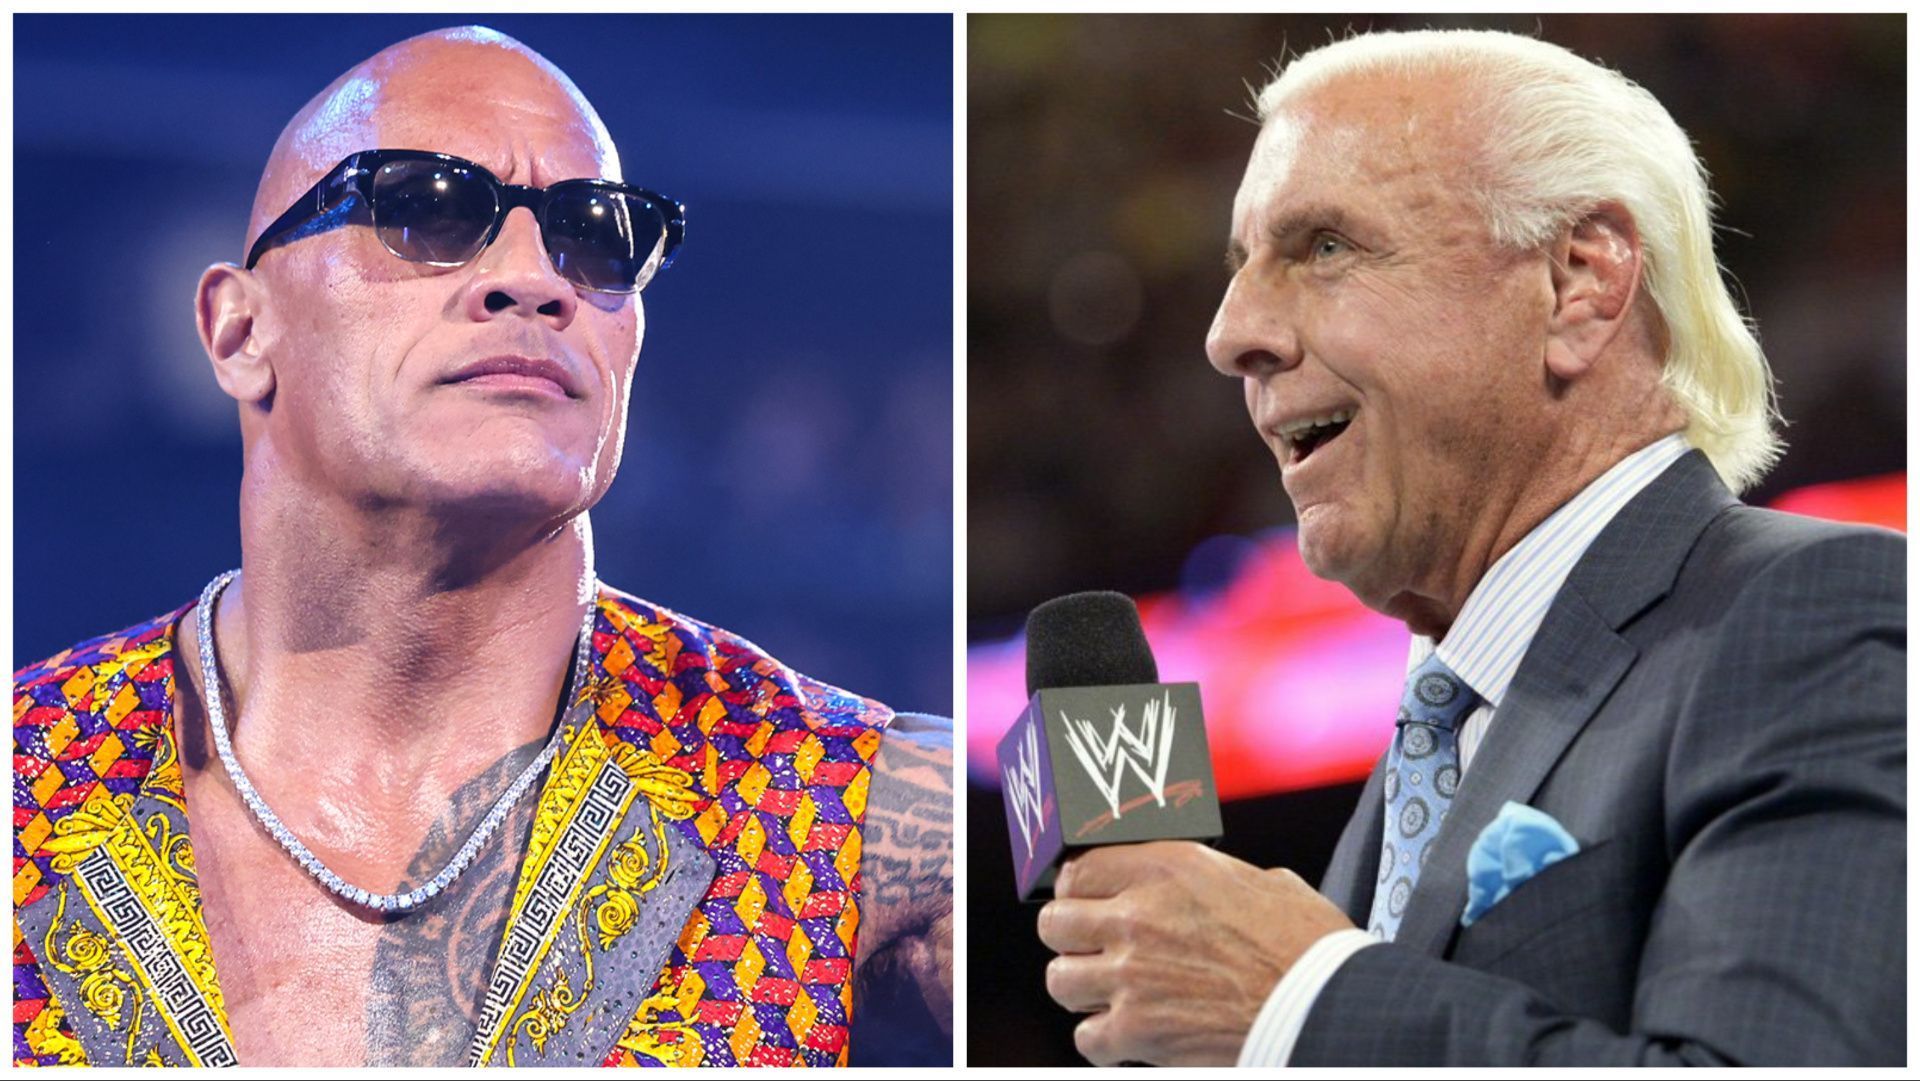 The Rock on WWE SmackDown, Ric Flair on WWE RAW